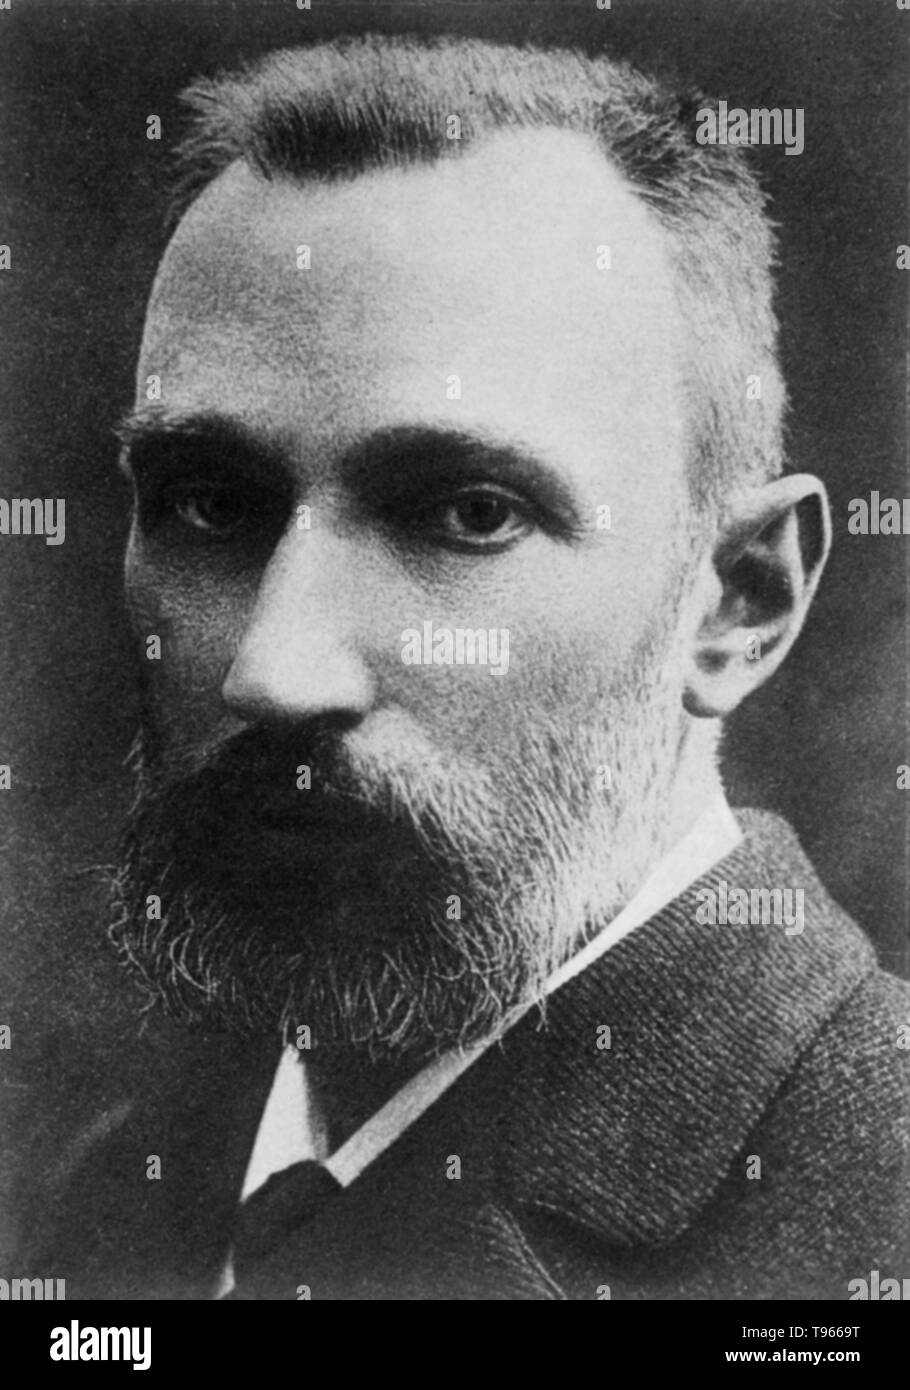 Pierre Curie (May 15, 1859 - April 19, 1906) ) was a French Nobel laureate physicist, a pioneer in crystallography, magnetism, piezoelectricity and radioactivity. In 1903 he received the Nobel Prize in Physics with his wife, Marie Salomea Sklodowska-Curie, and Henri Becquerel. He studied ferromagnetism, paramagnetism, and diamagnetism for his doctoral thesis, and discovered the effect of temperature on paramagnetism which is now known as Curie's law. Stock Photo